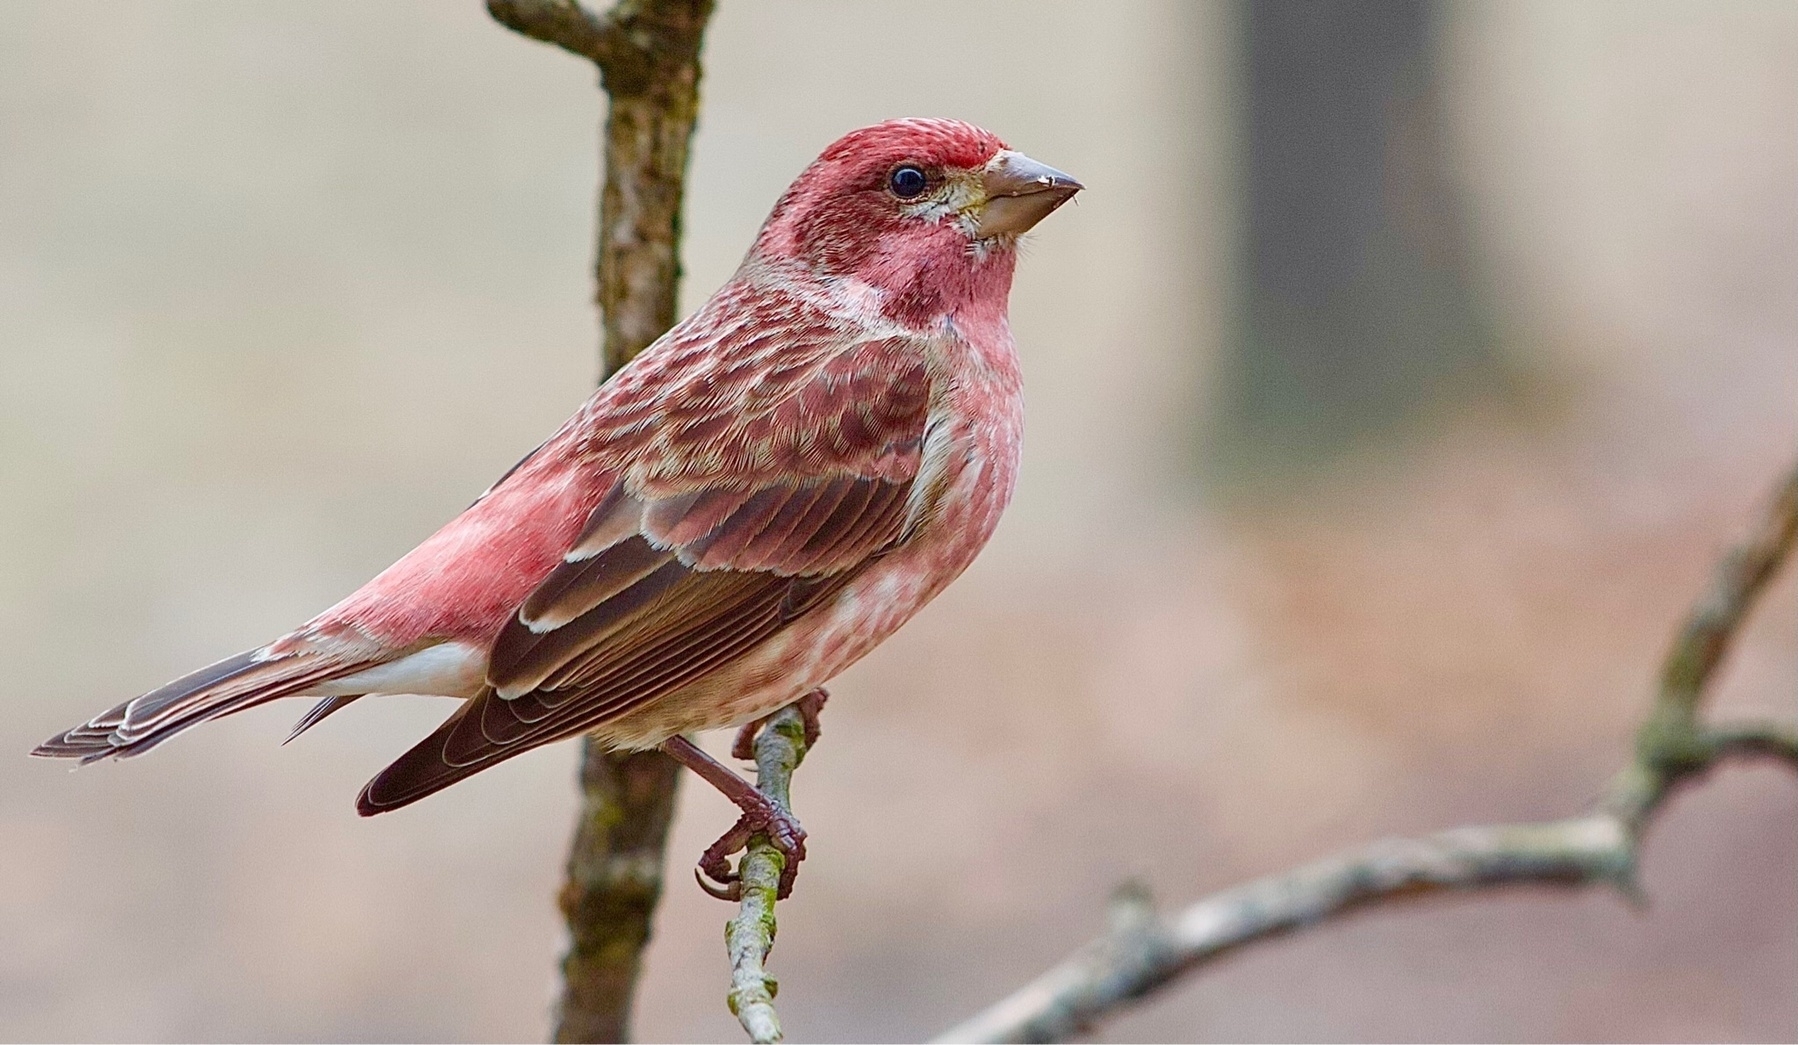 A small raspberry colored bird is perched on a branch set against a blurred winter background